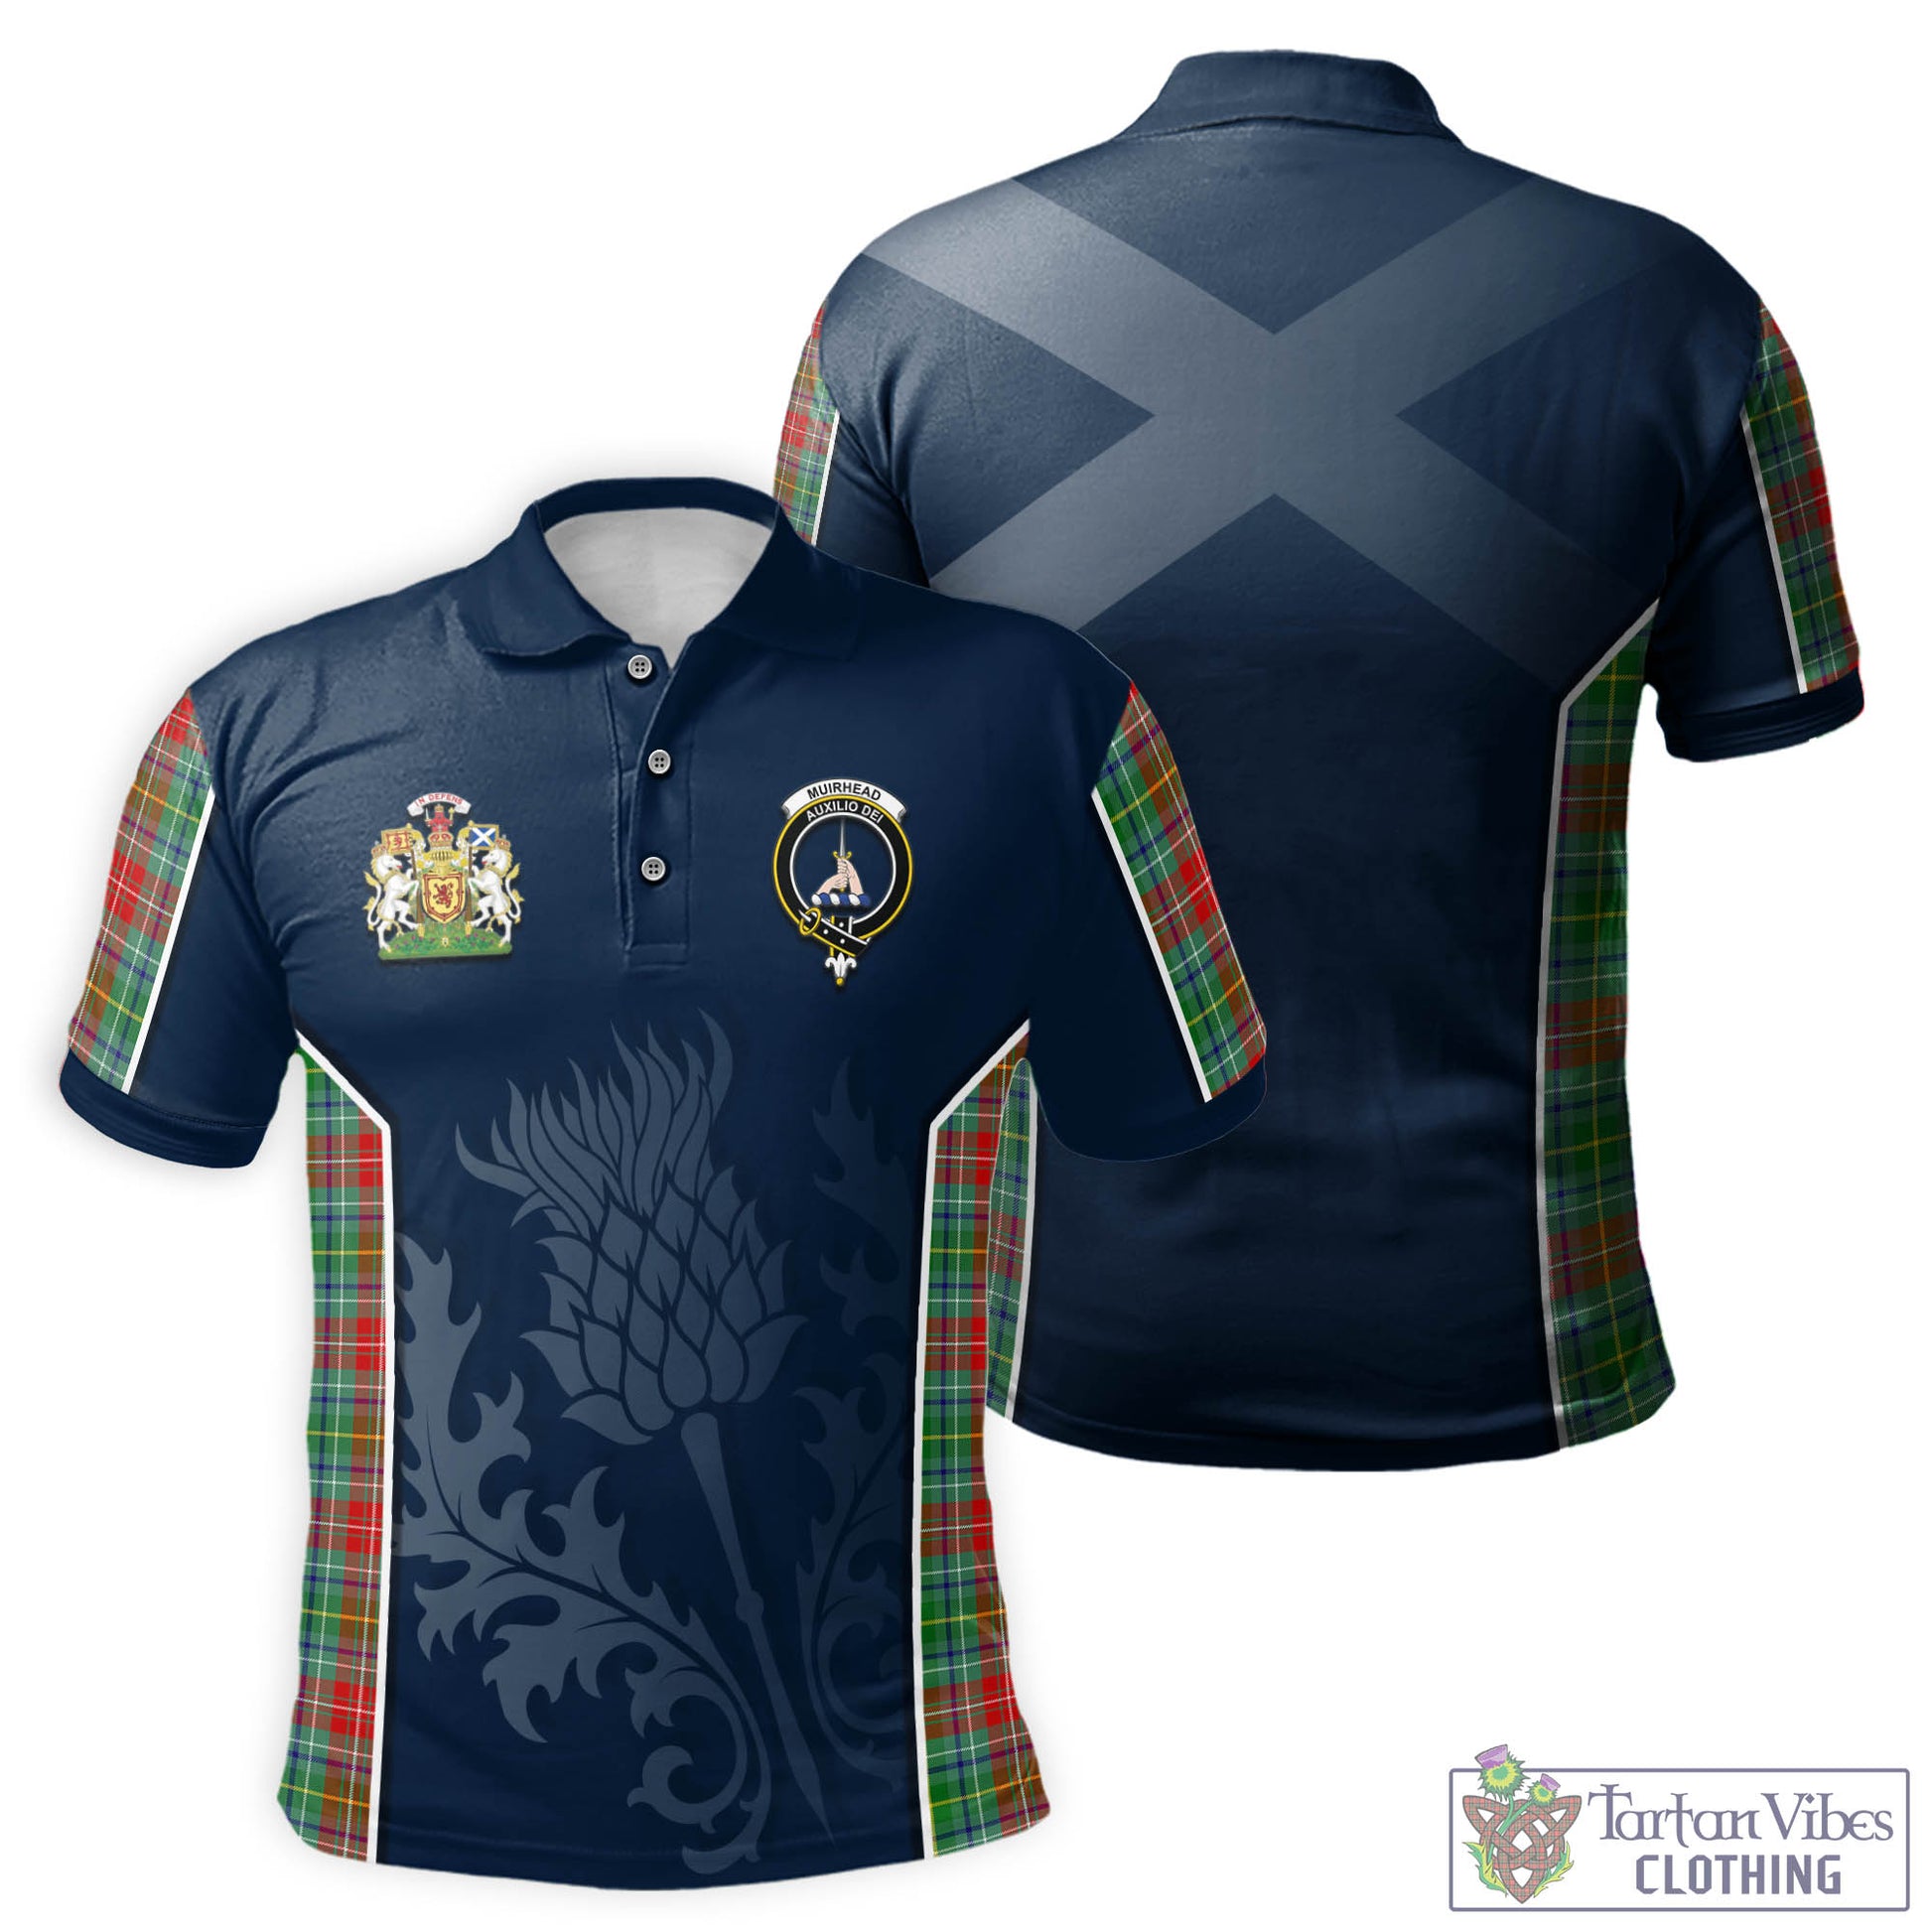 Tartan Vibes Clothing Muirhead Tartan Men's Polo Shirt with Family Crest and Scottish Thistle Vibes Sport Style